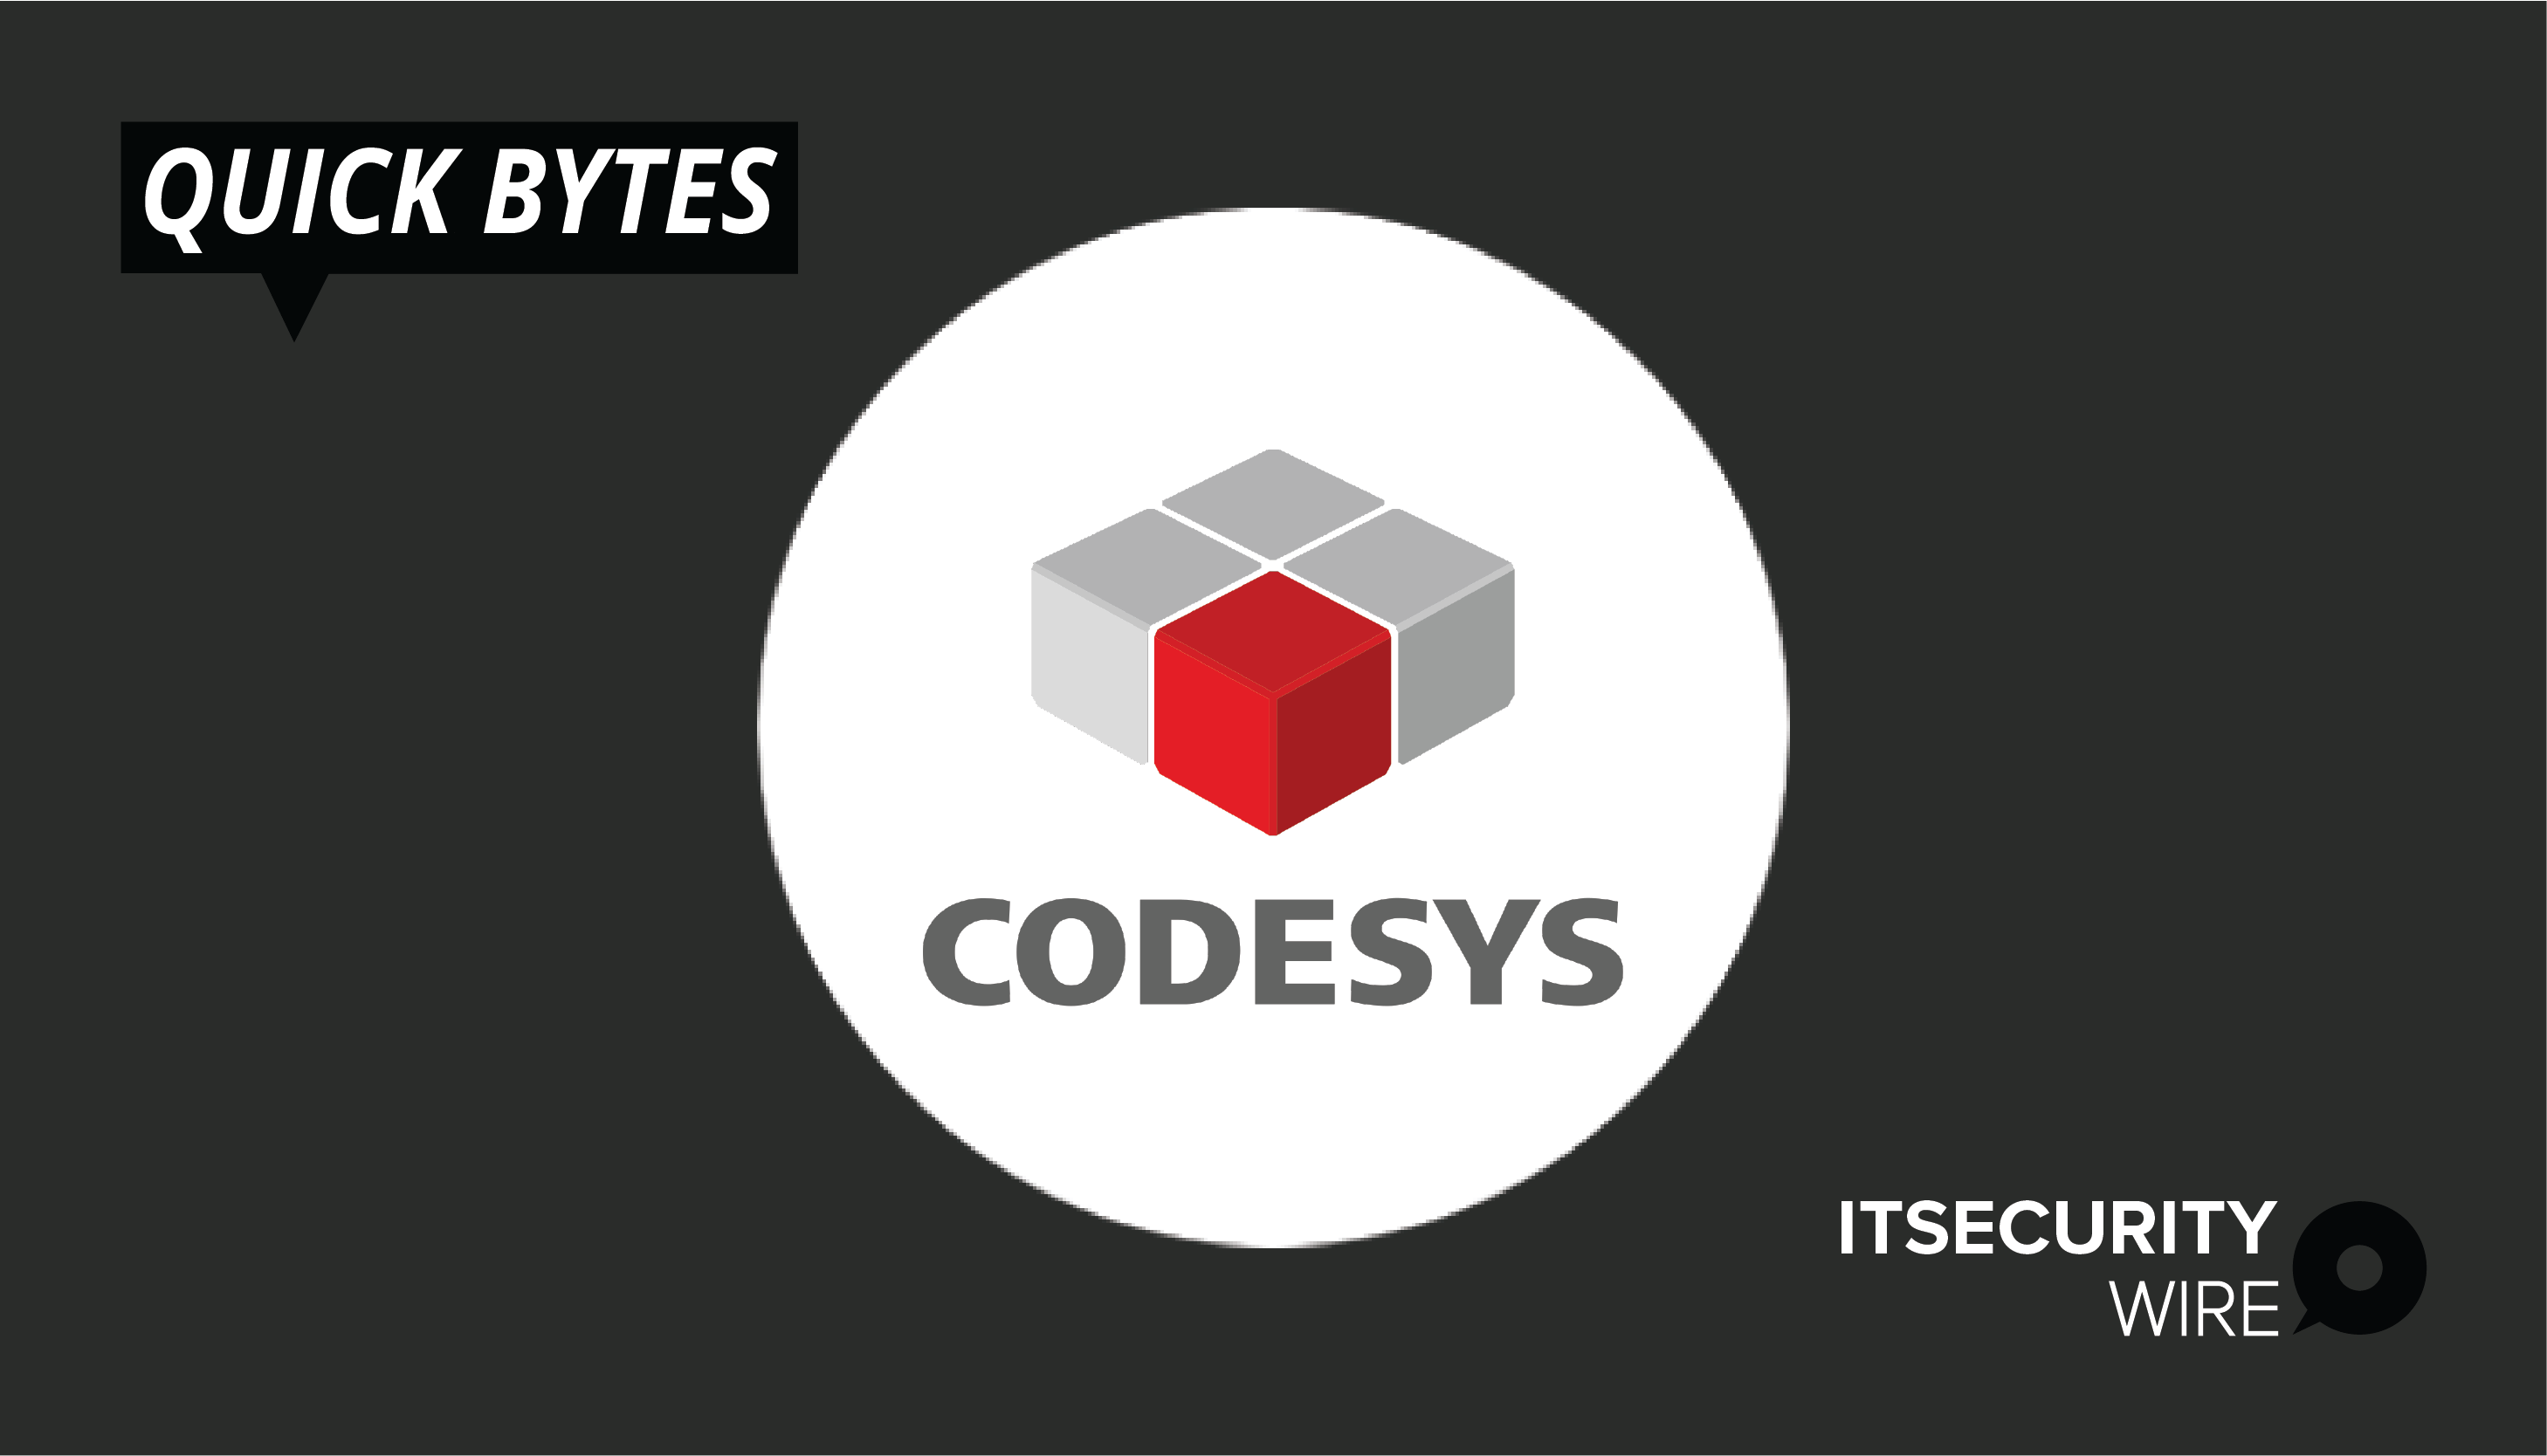 Codesys Patches Flaws Affecting Controllers From Several ICS Vendors